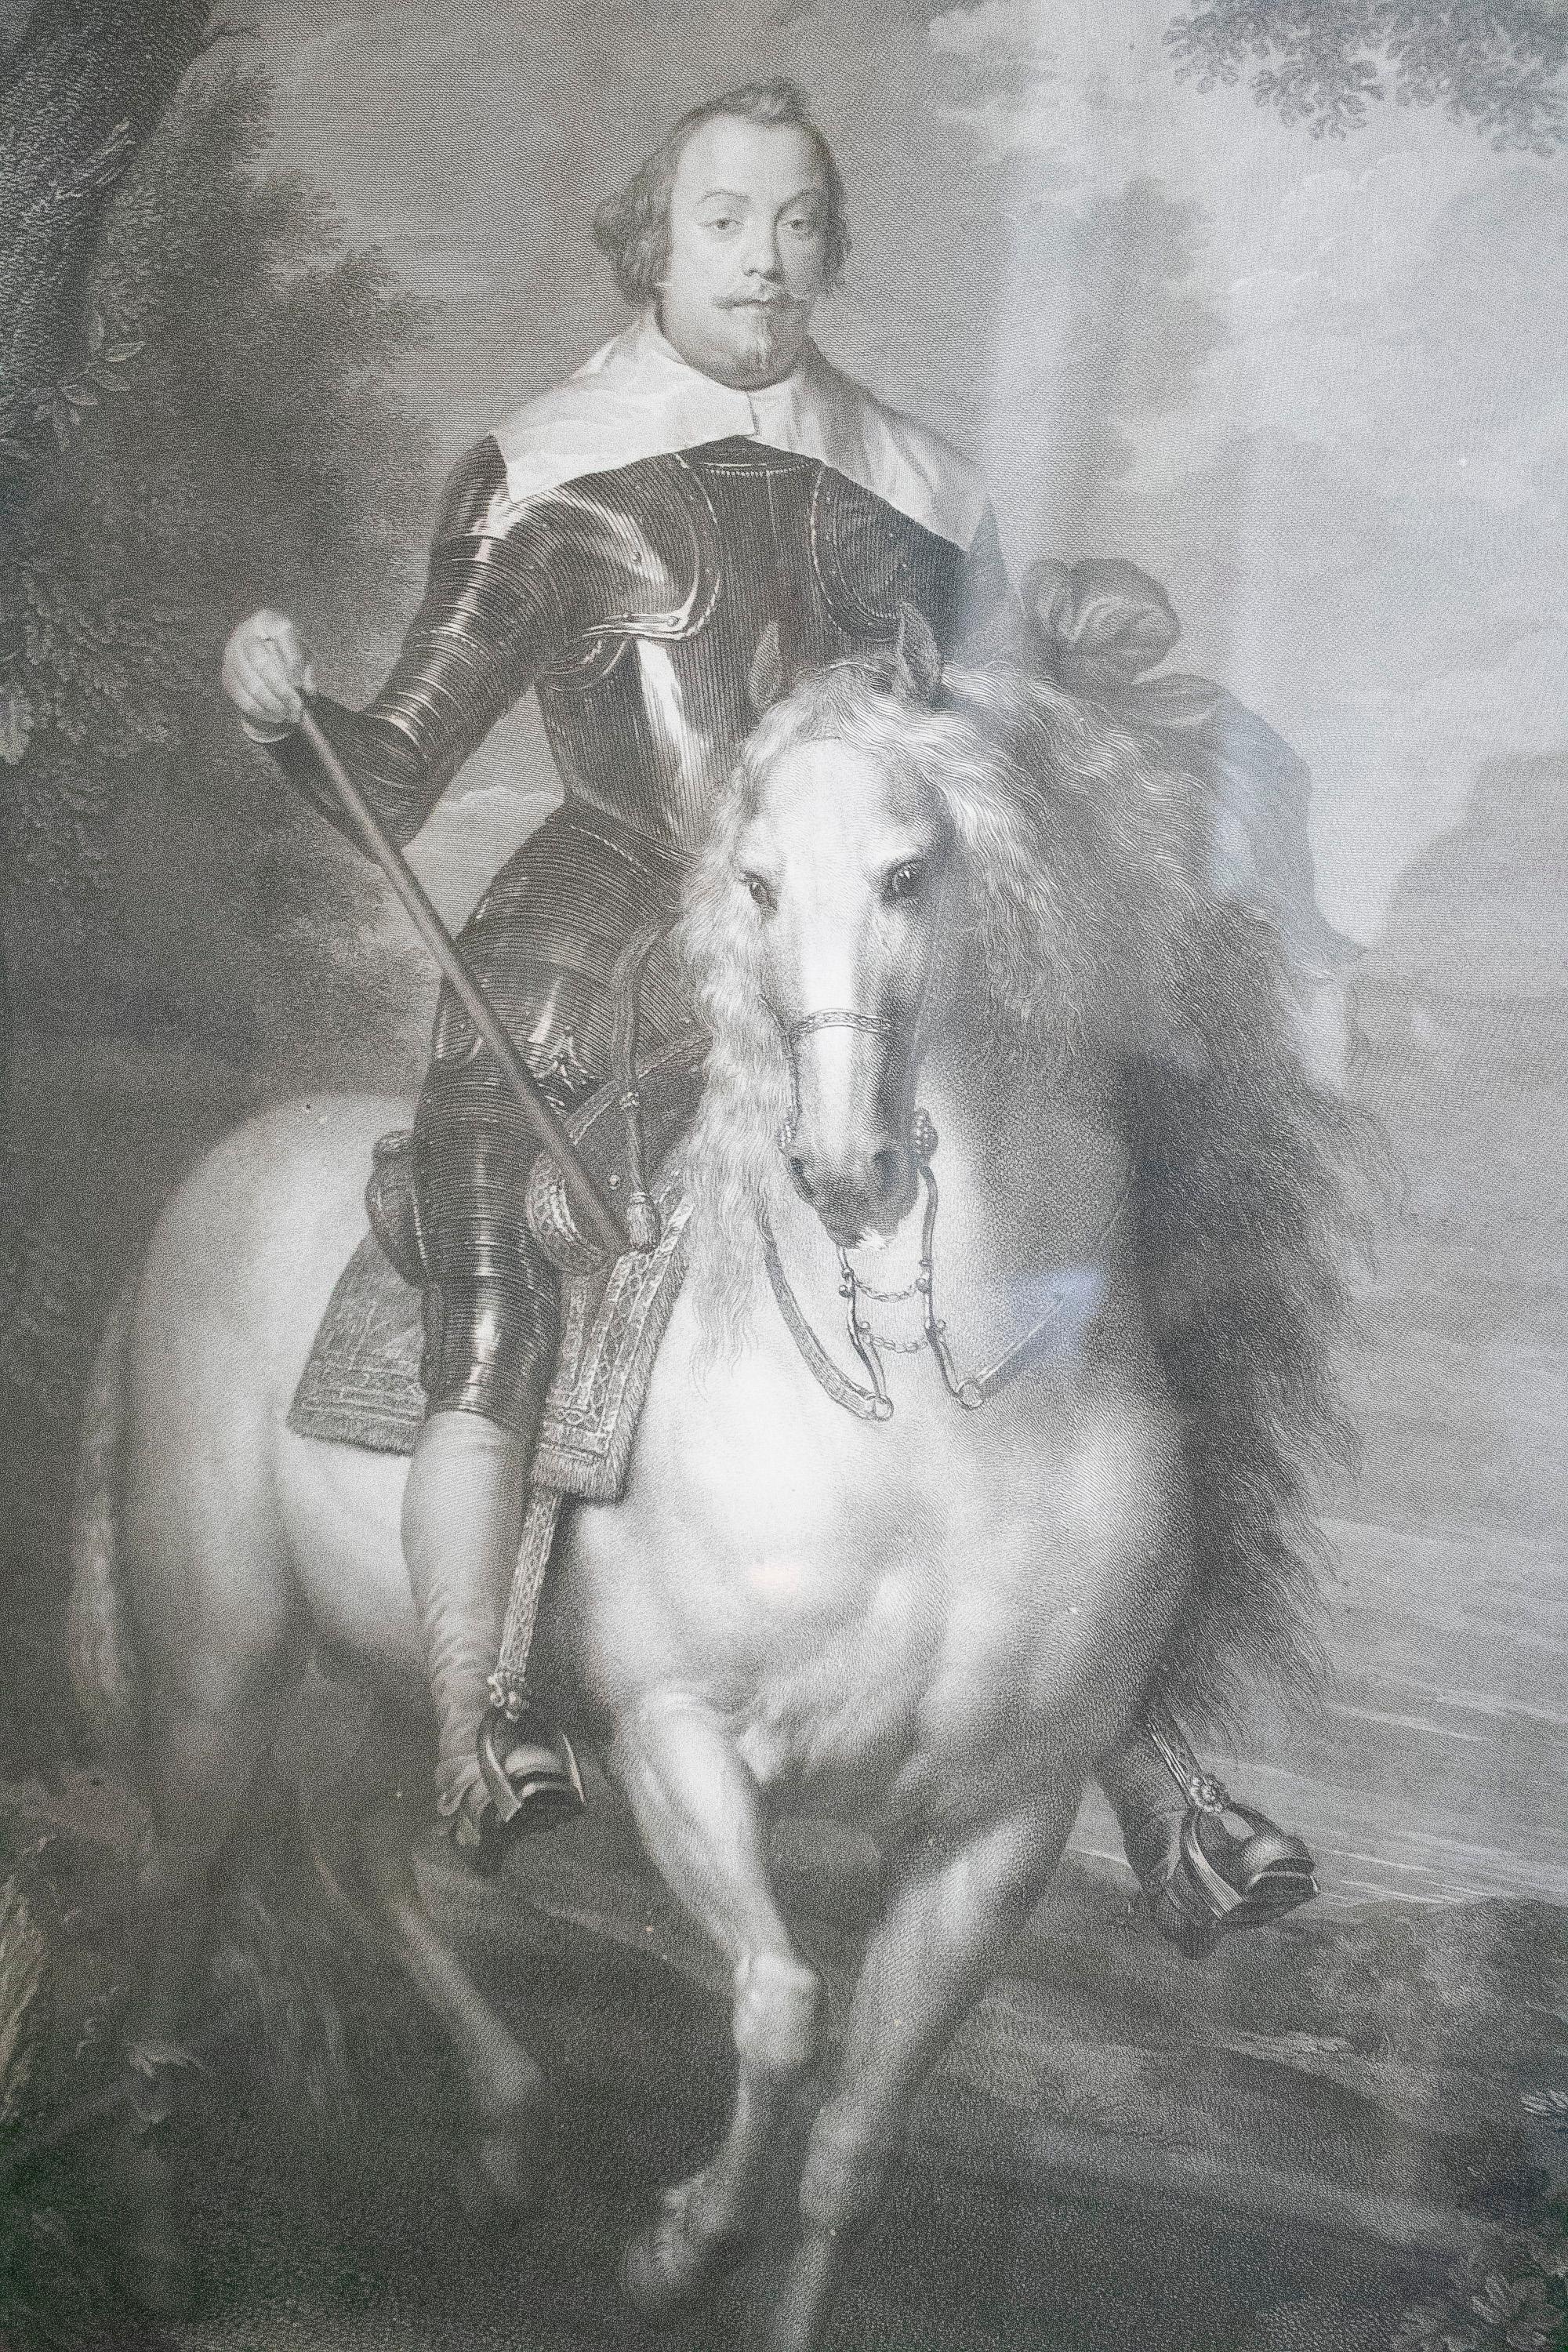 Antique mid 18th century German engraved portrait of Spanish ambassador Francisco de Moncada, with full armor and horse

Measures with frame: 71 * 52 * 1.5 cm.
 